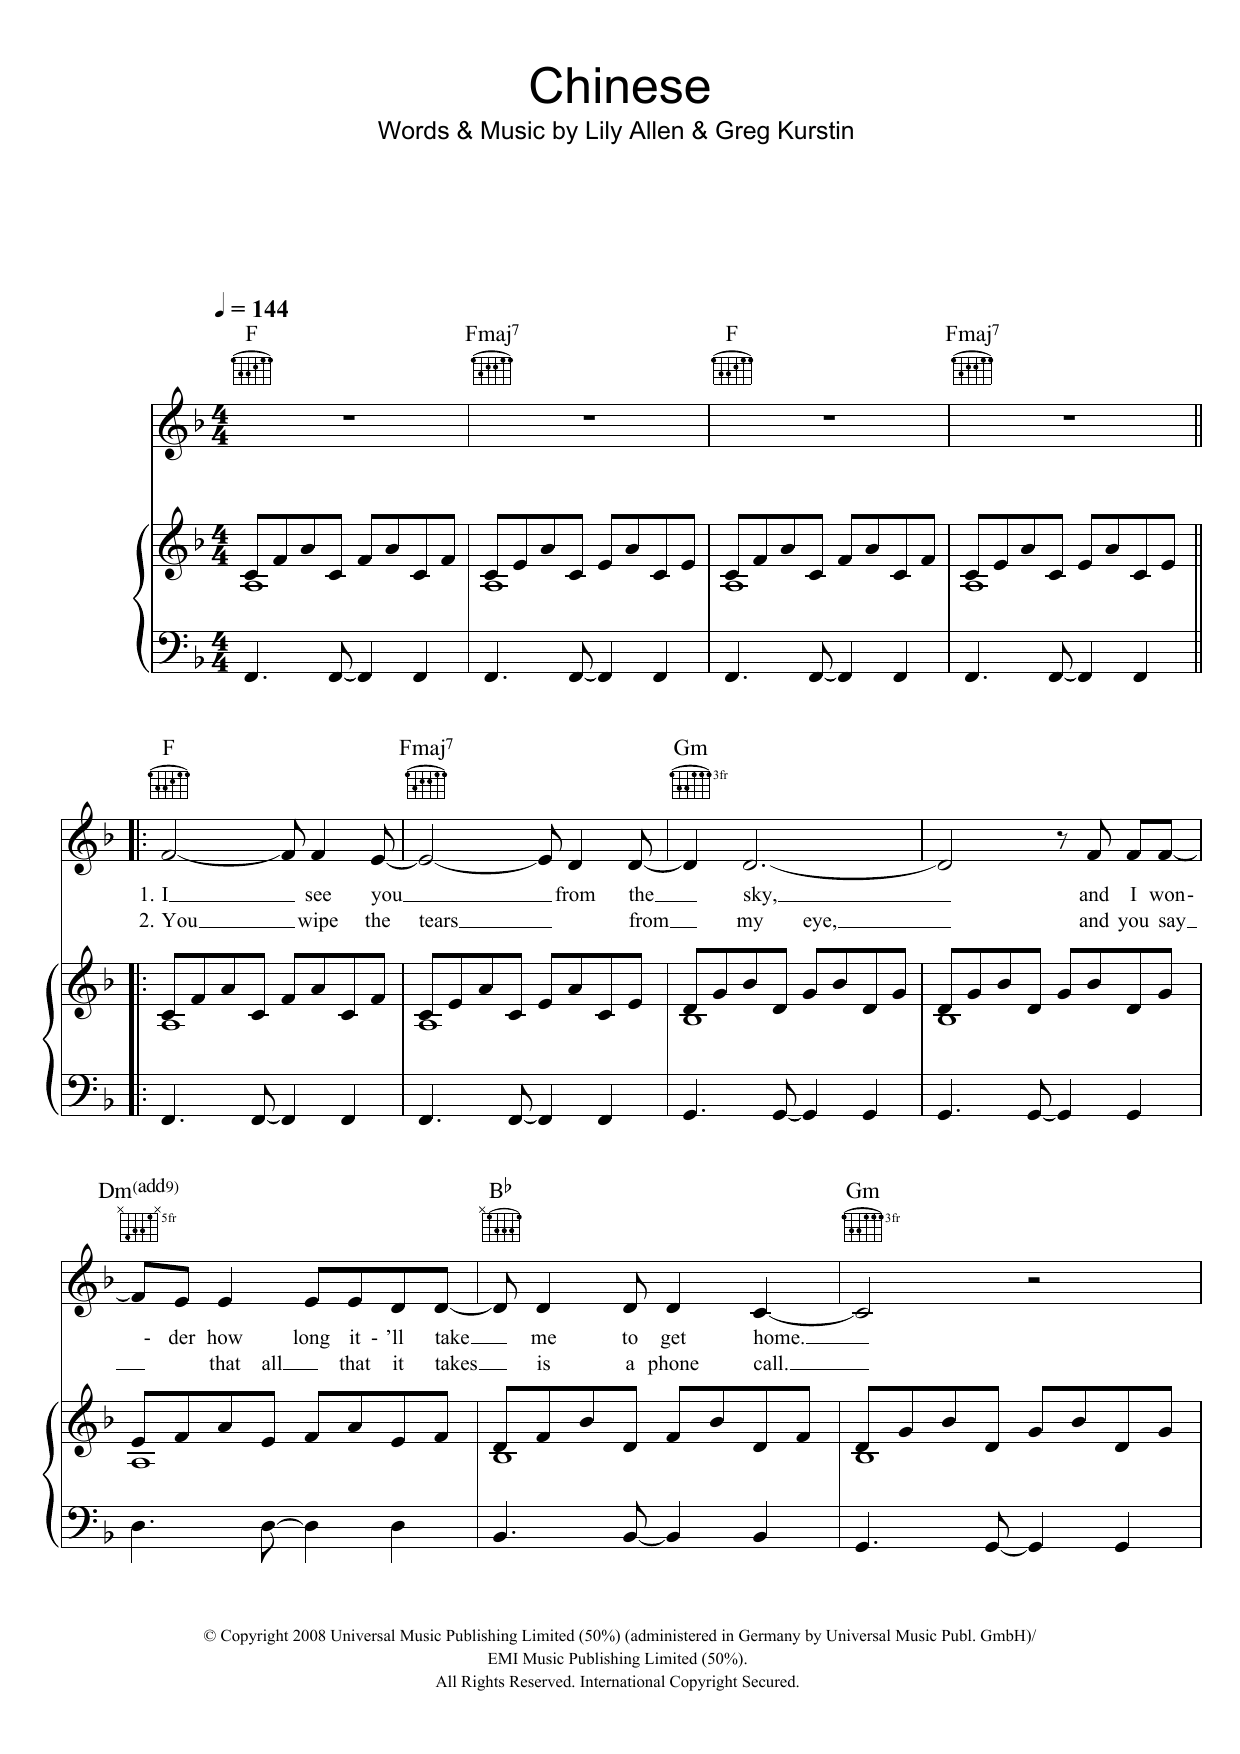 Download Lily Allen Chinese Sheet Music